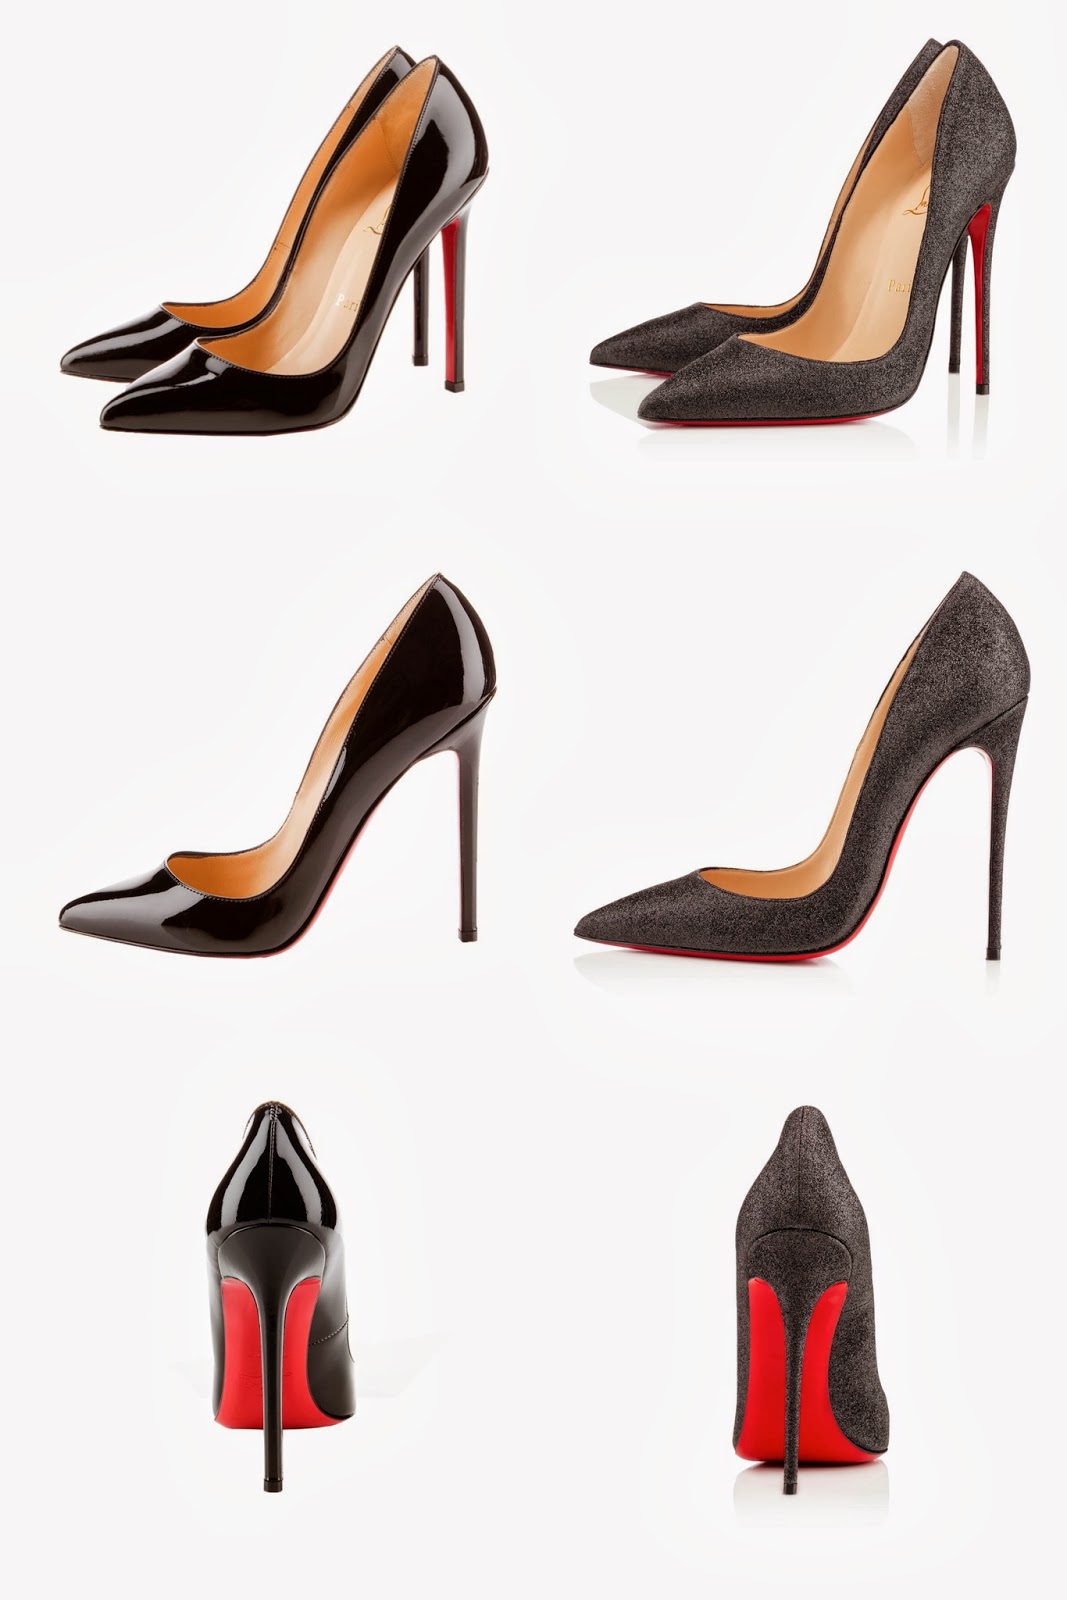 christian louboutin pigalle or so kate